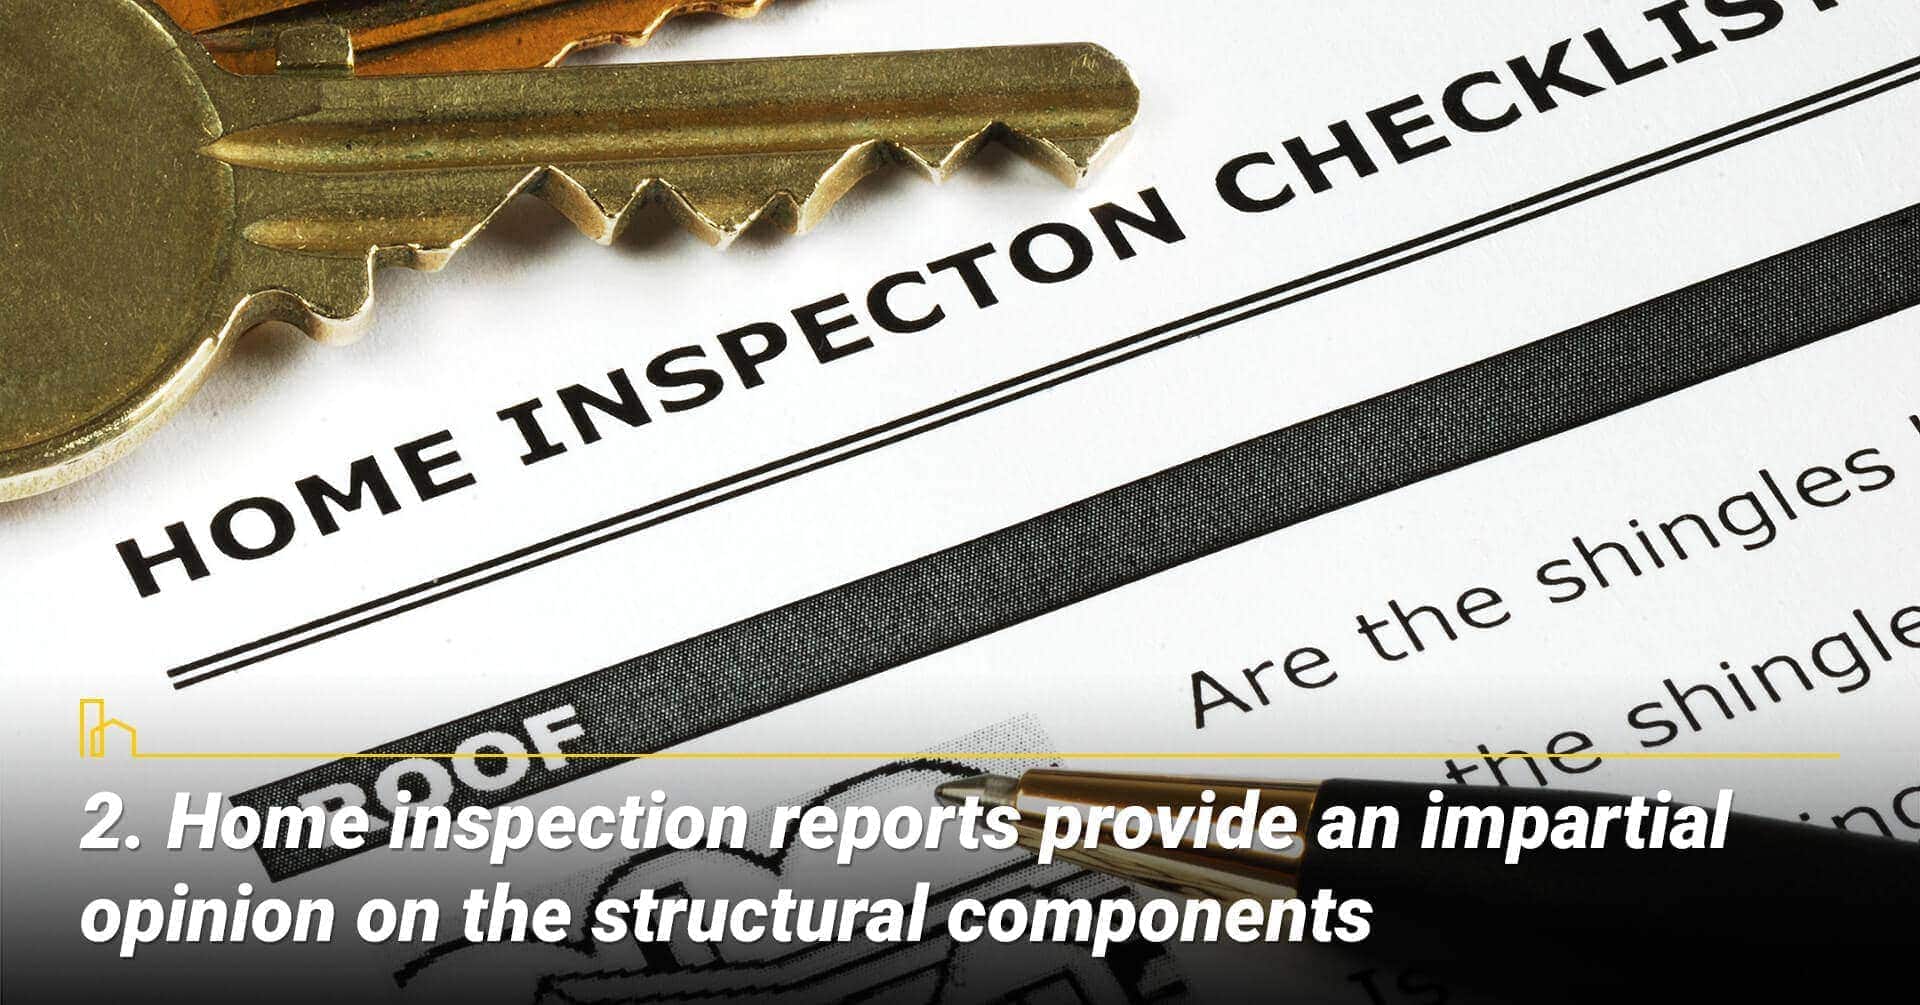 Home inspection reports provide an impartial opinion on the structural components, home inspection report shows the current structure of the property